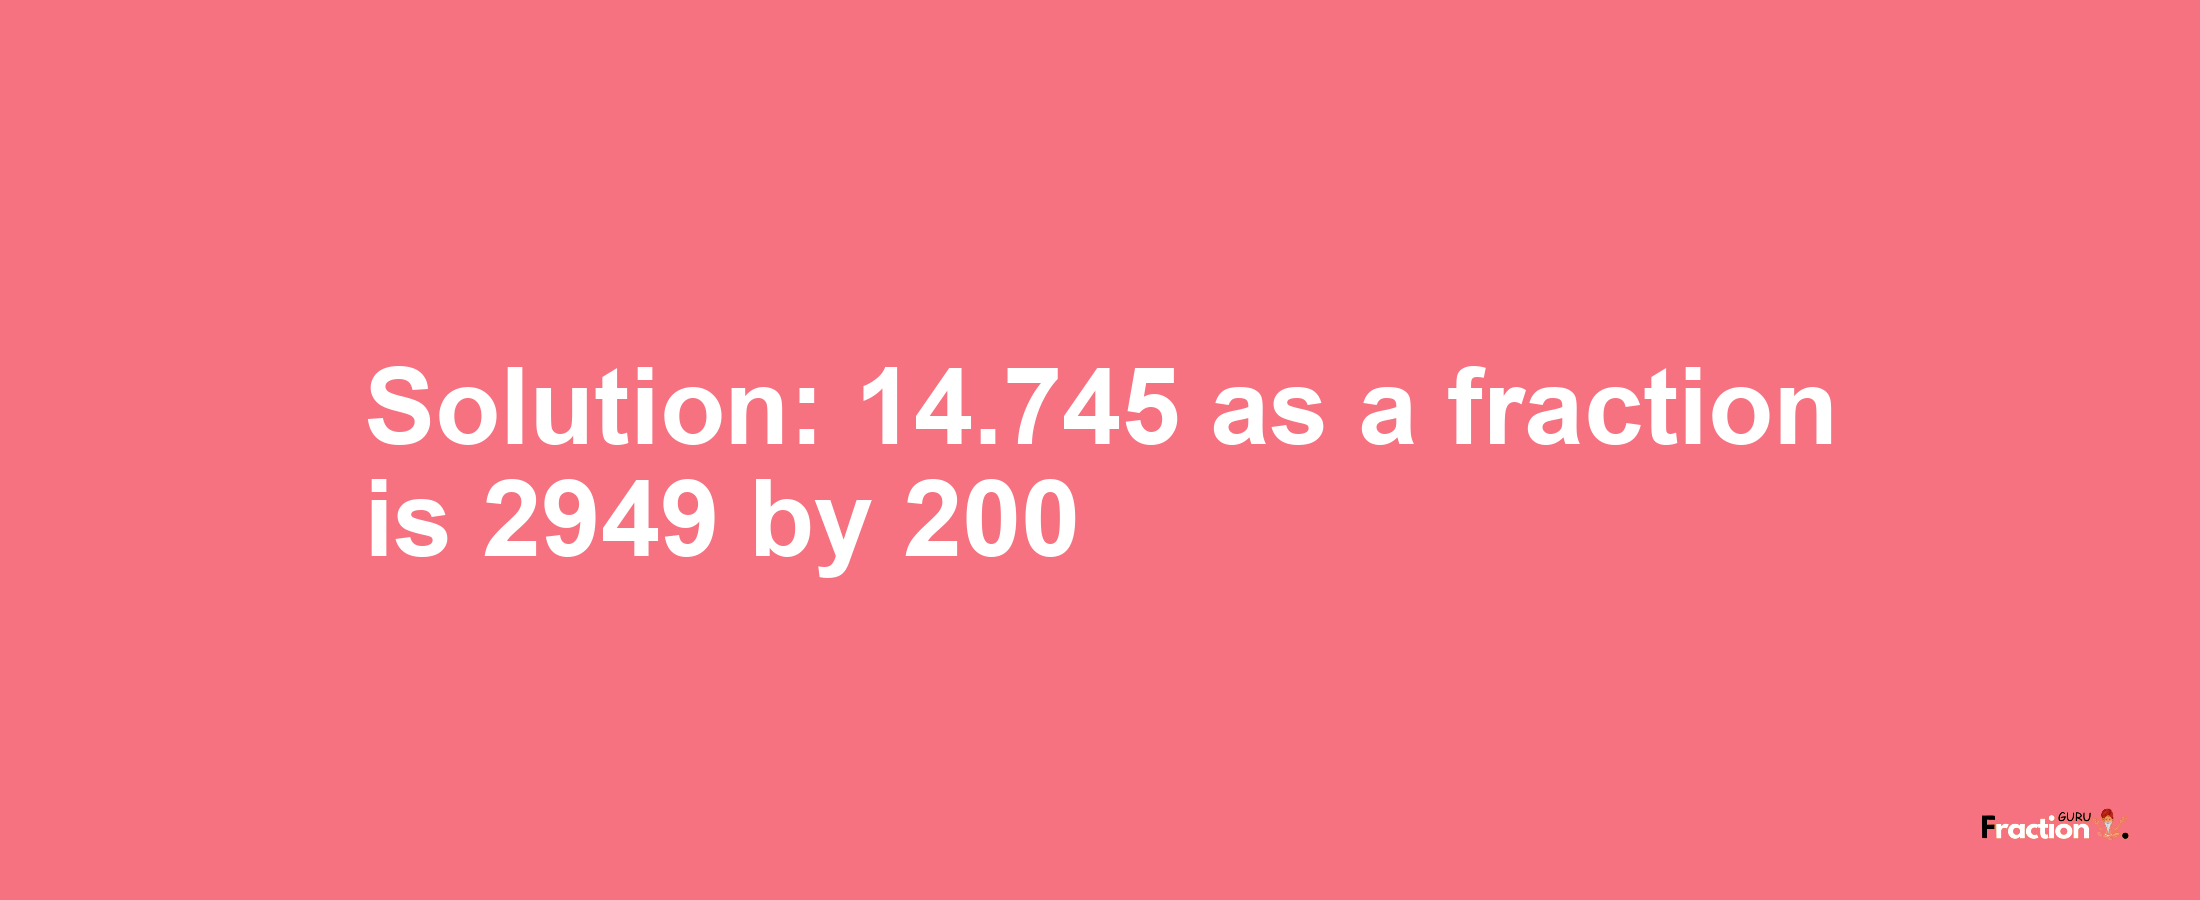 Solution:14.745 as a fraction is 2949/200